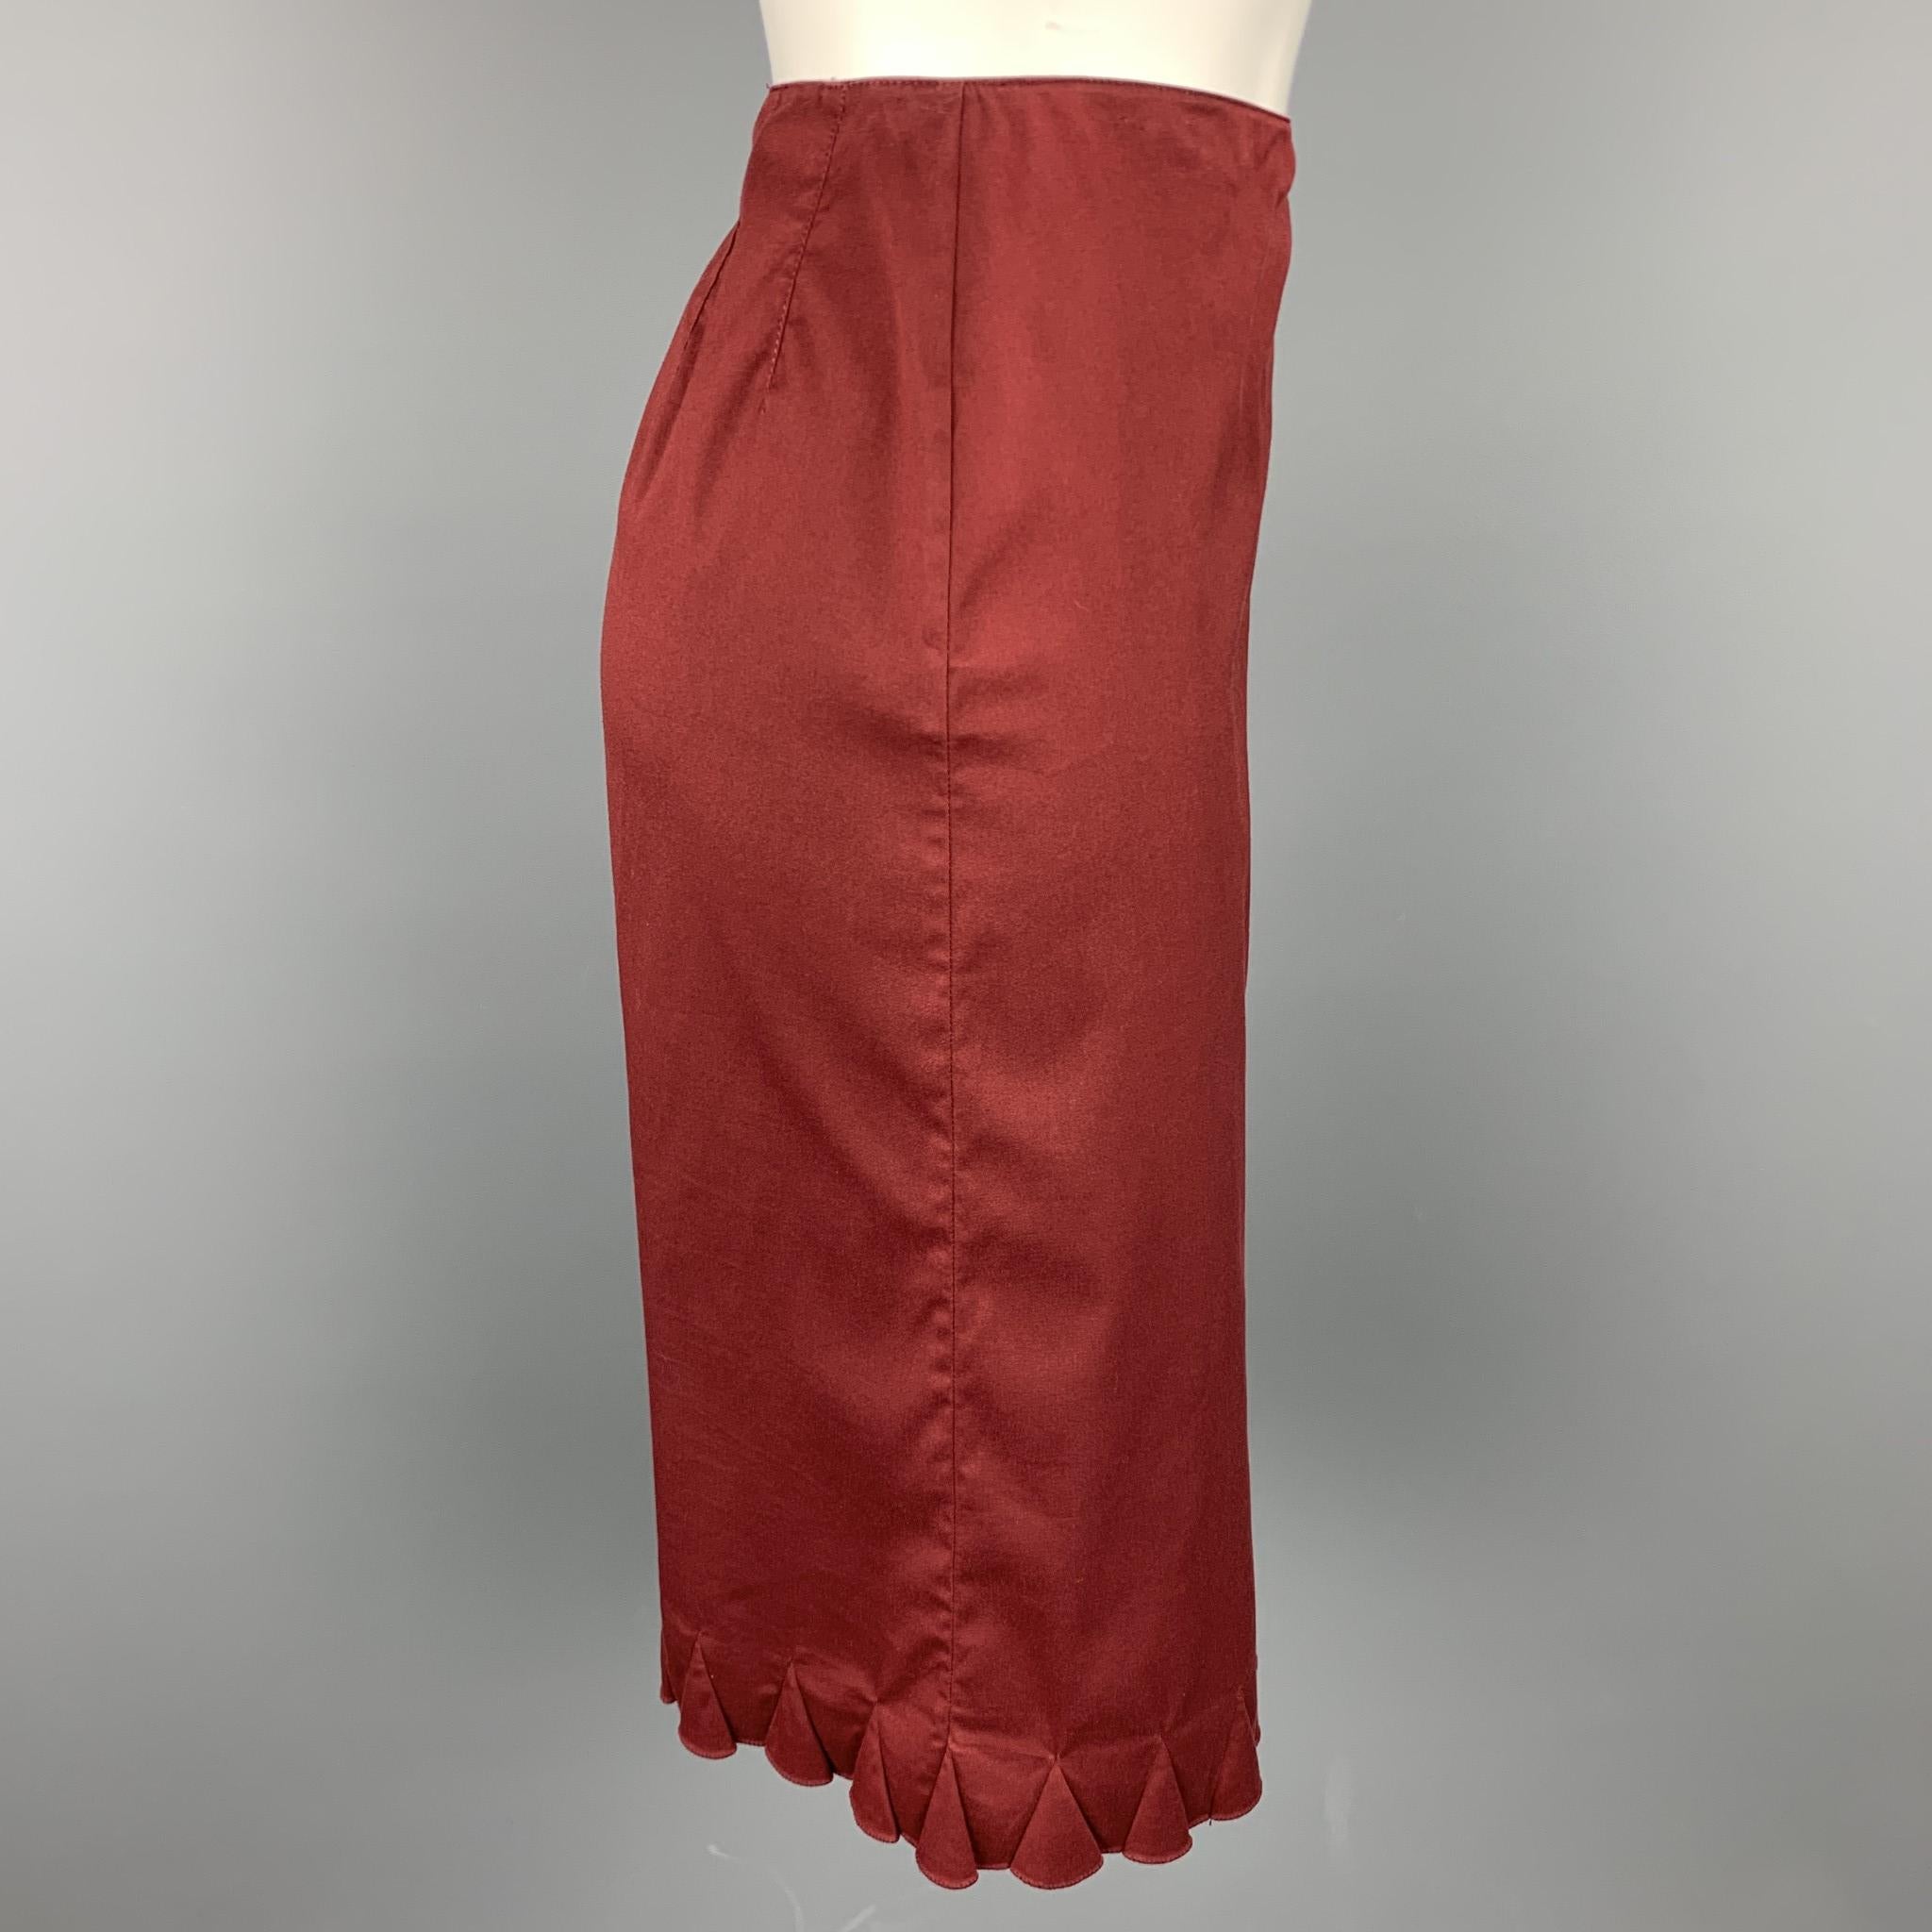 PRADA skirt comes in a burgundy cotton blend with no liner featuring a a-line style, ruffled hem, and a side zip up closure. Made in Italy.

Excellent Pre-Owned Condition.
Marked: 42

Measurements:

Waist: 28 in. 
Hip: 34 in.
Length: 23 in. 

SKU: